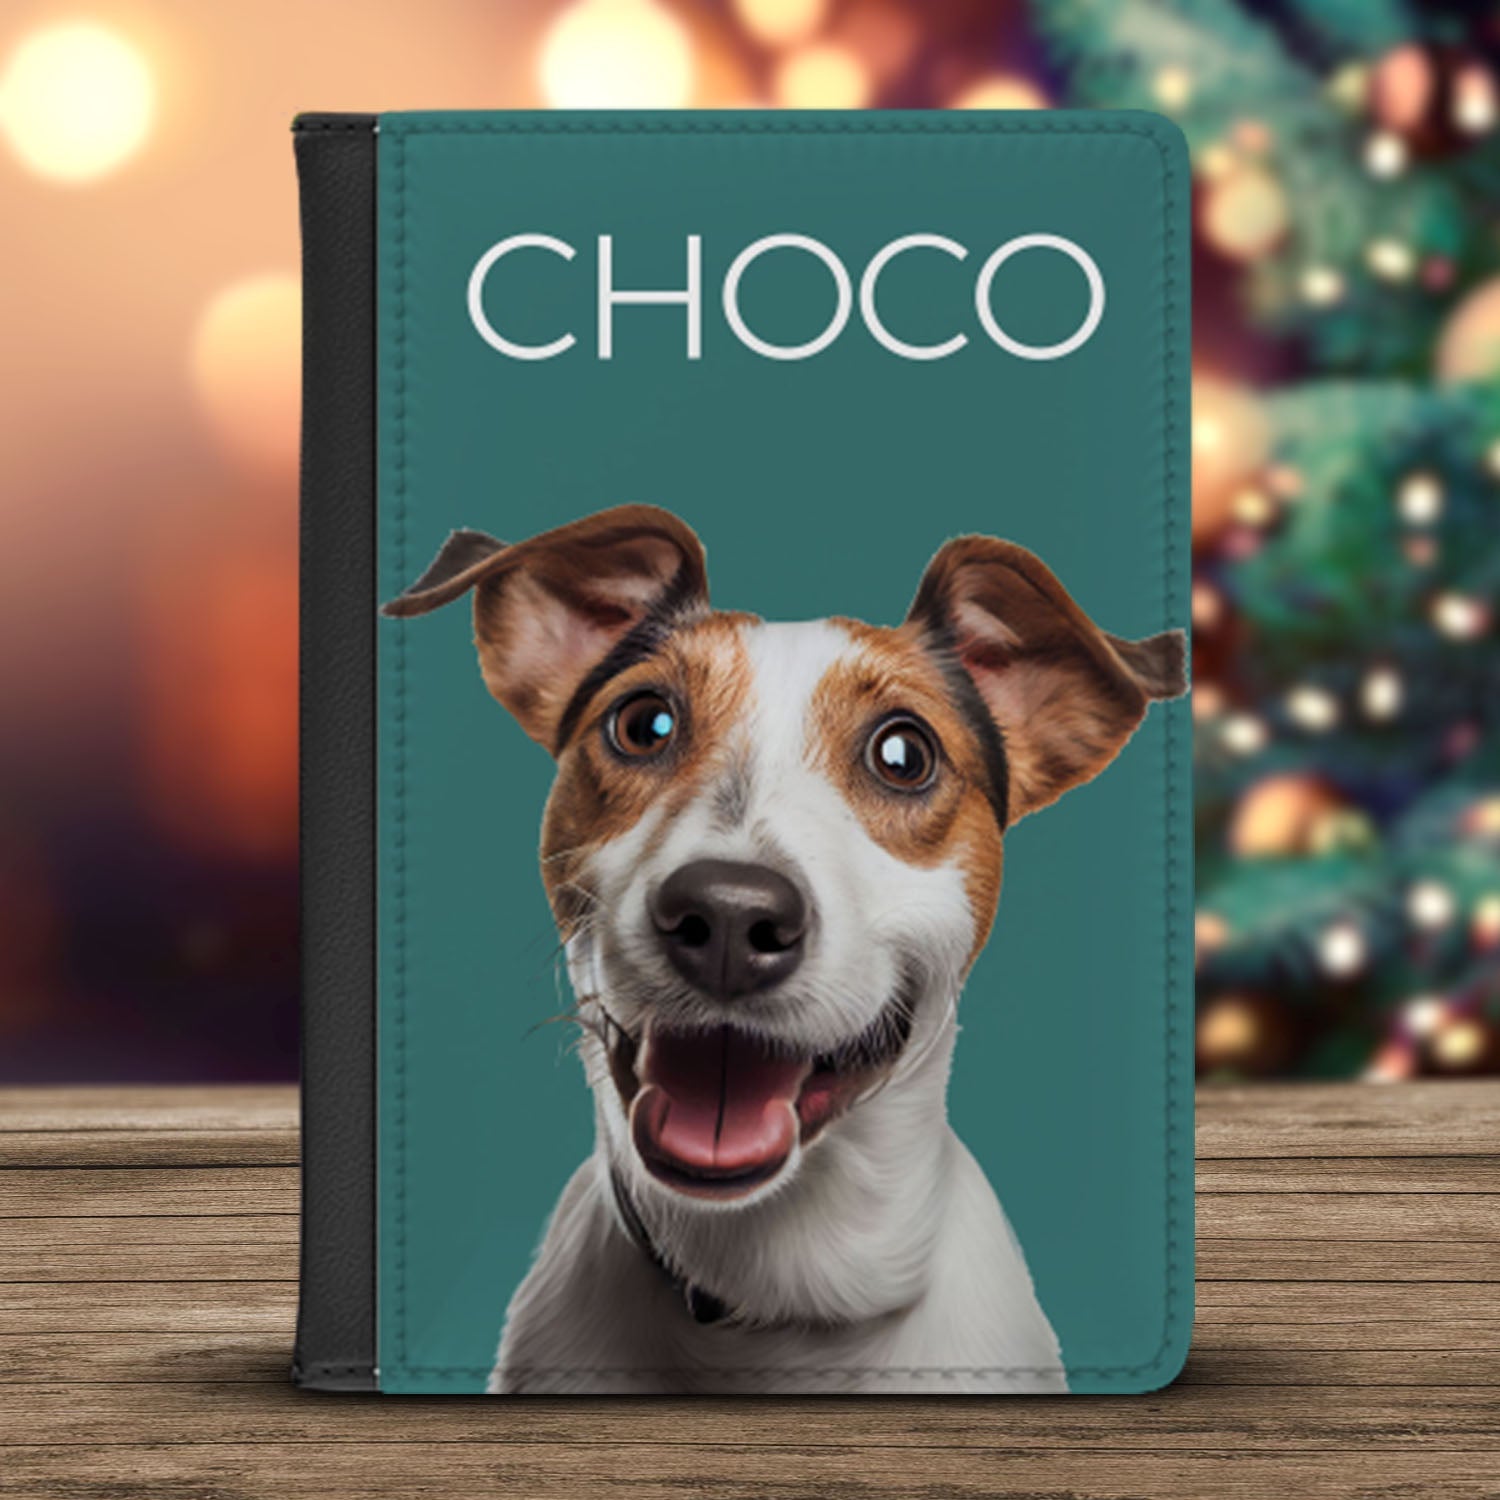 Personalised Pet Passport Cover - Shaggy Chic